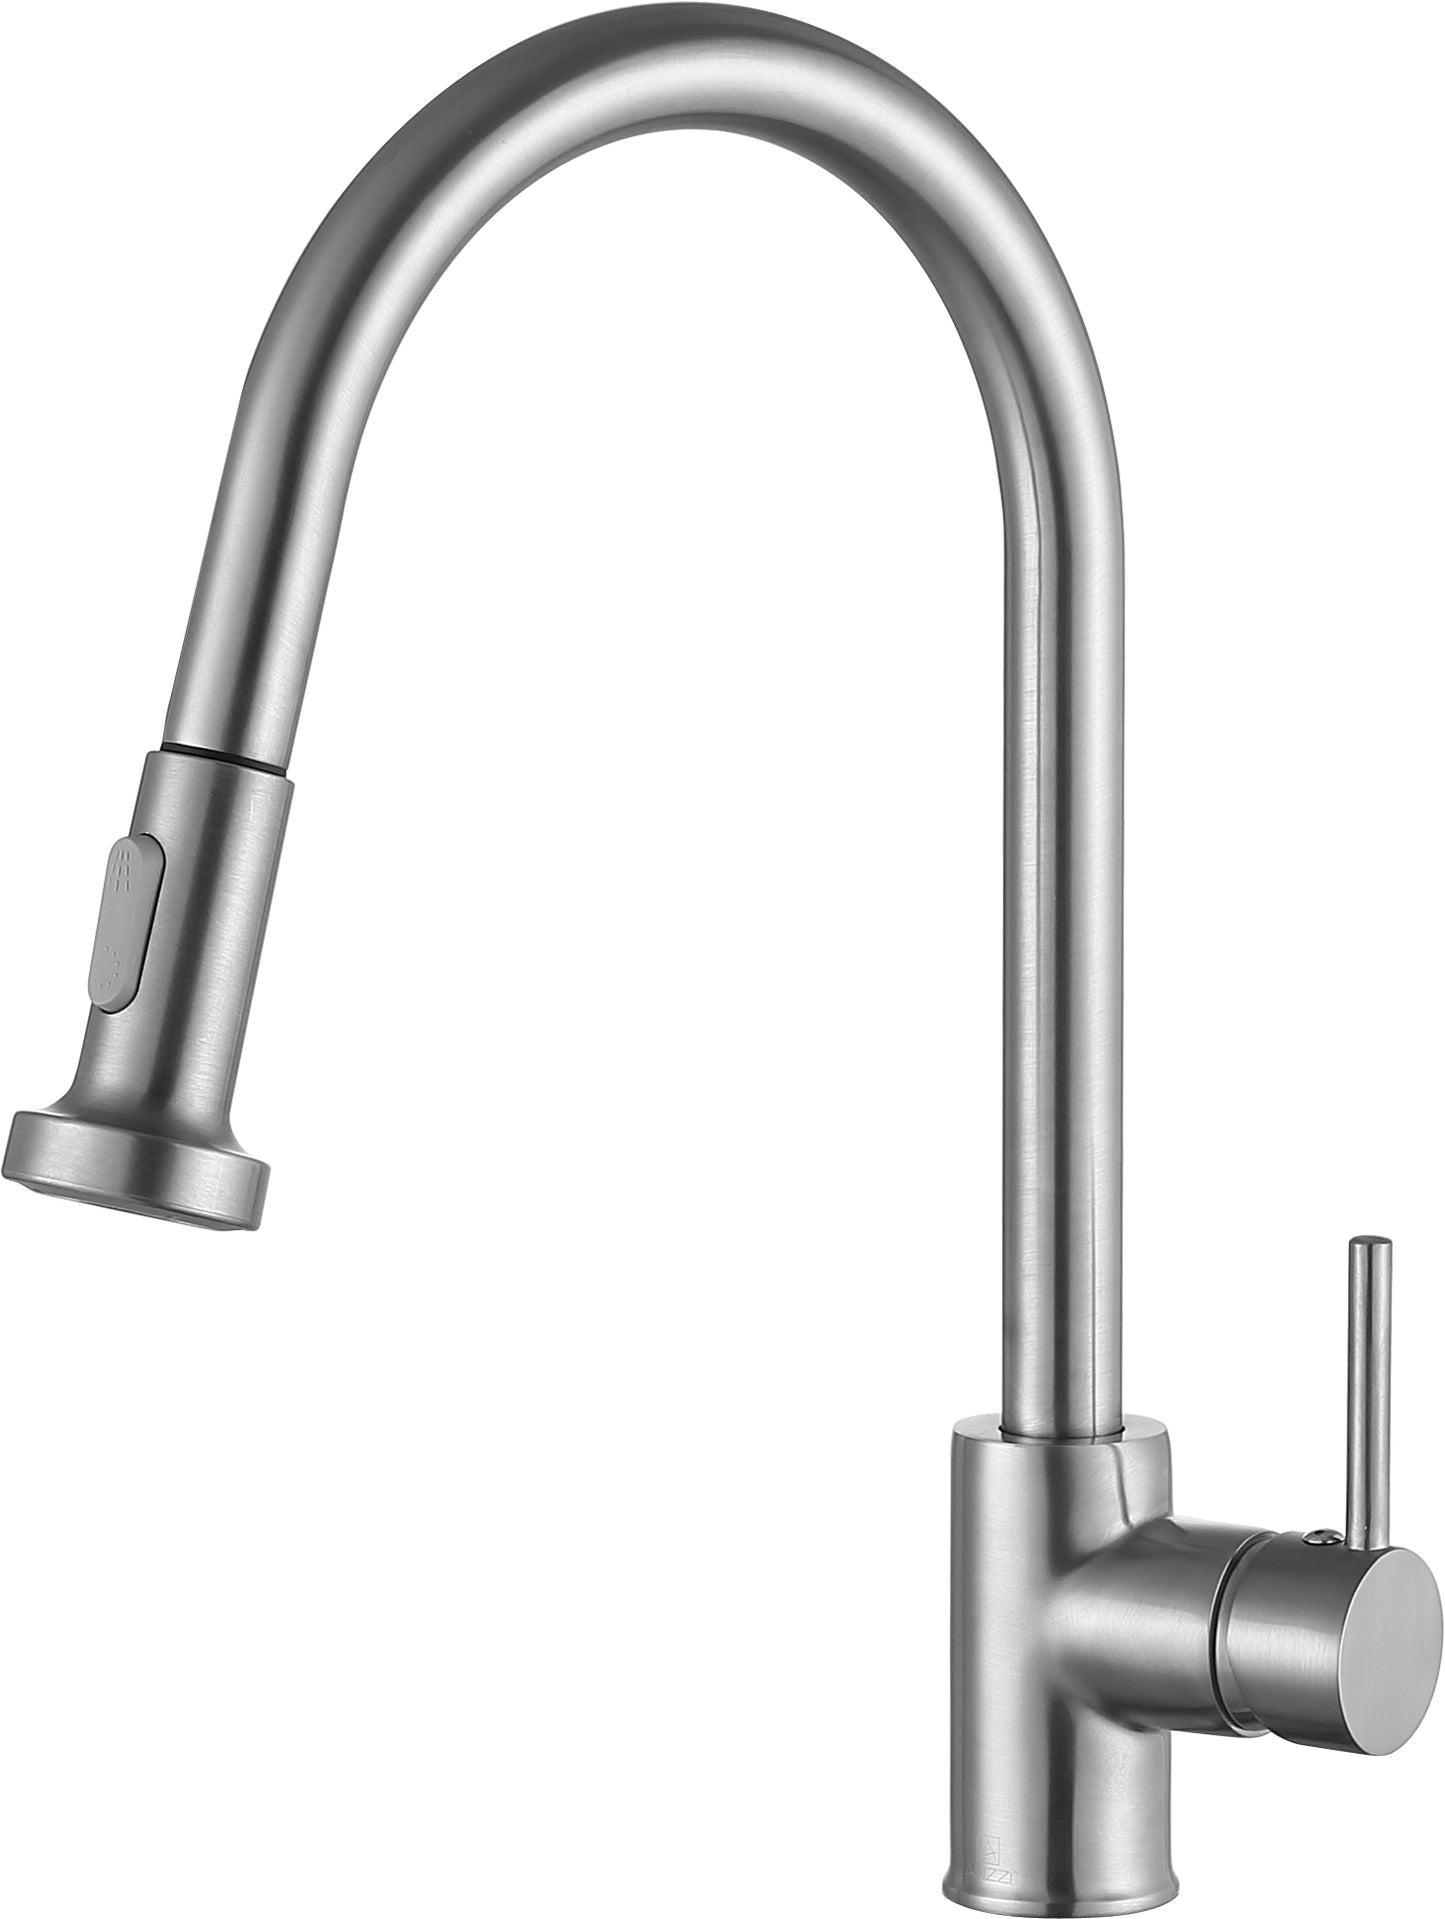 KF-AZ213BN - Tycho Single-Handle Pull-Out Sprayer Kitchen Faucet in Brushed Nickel